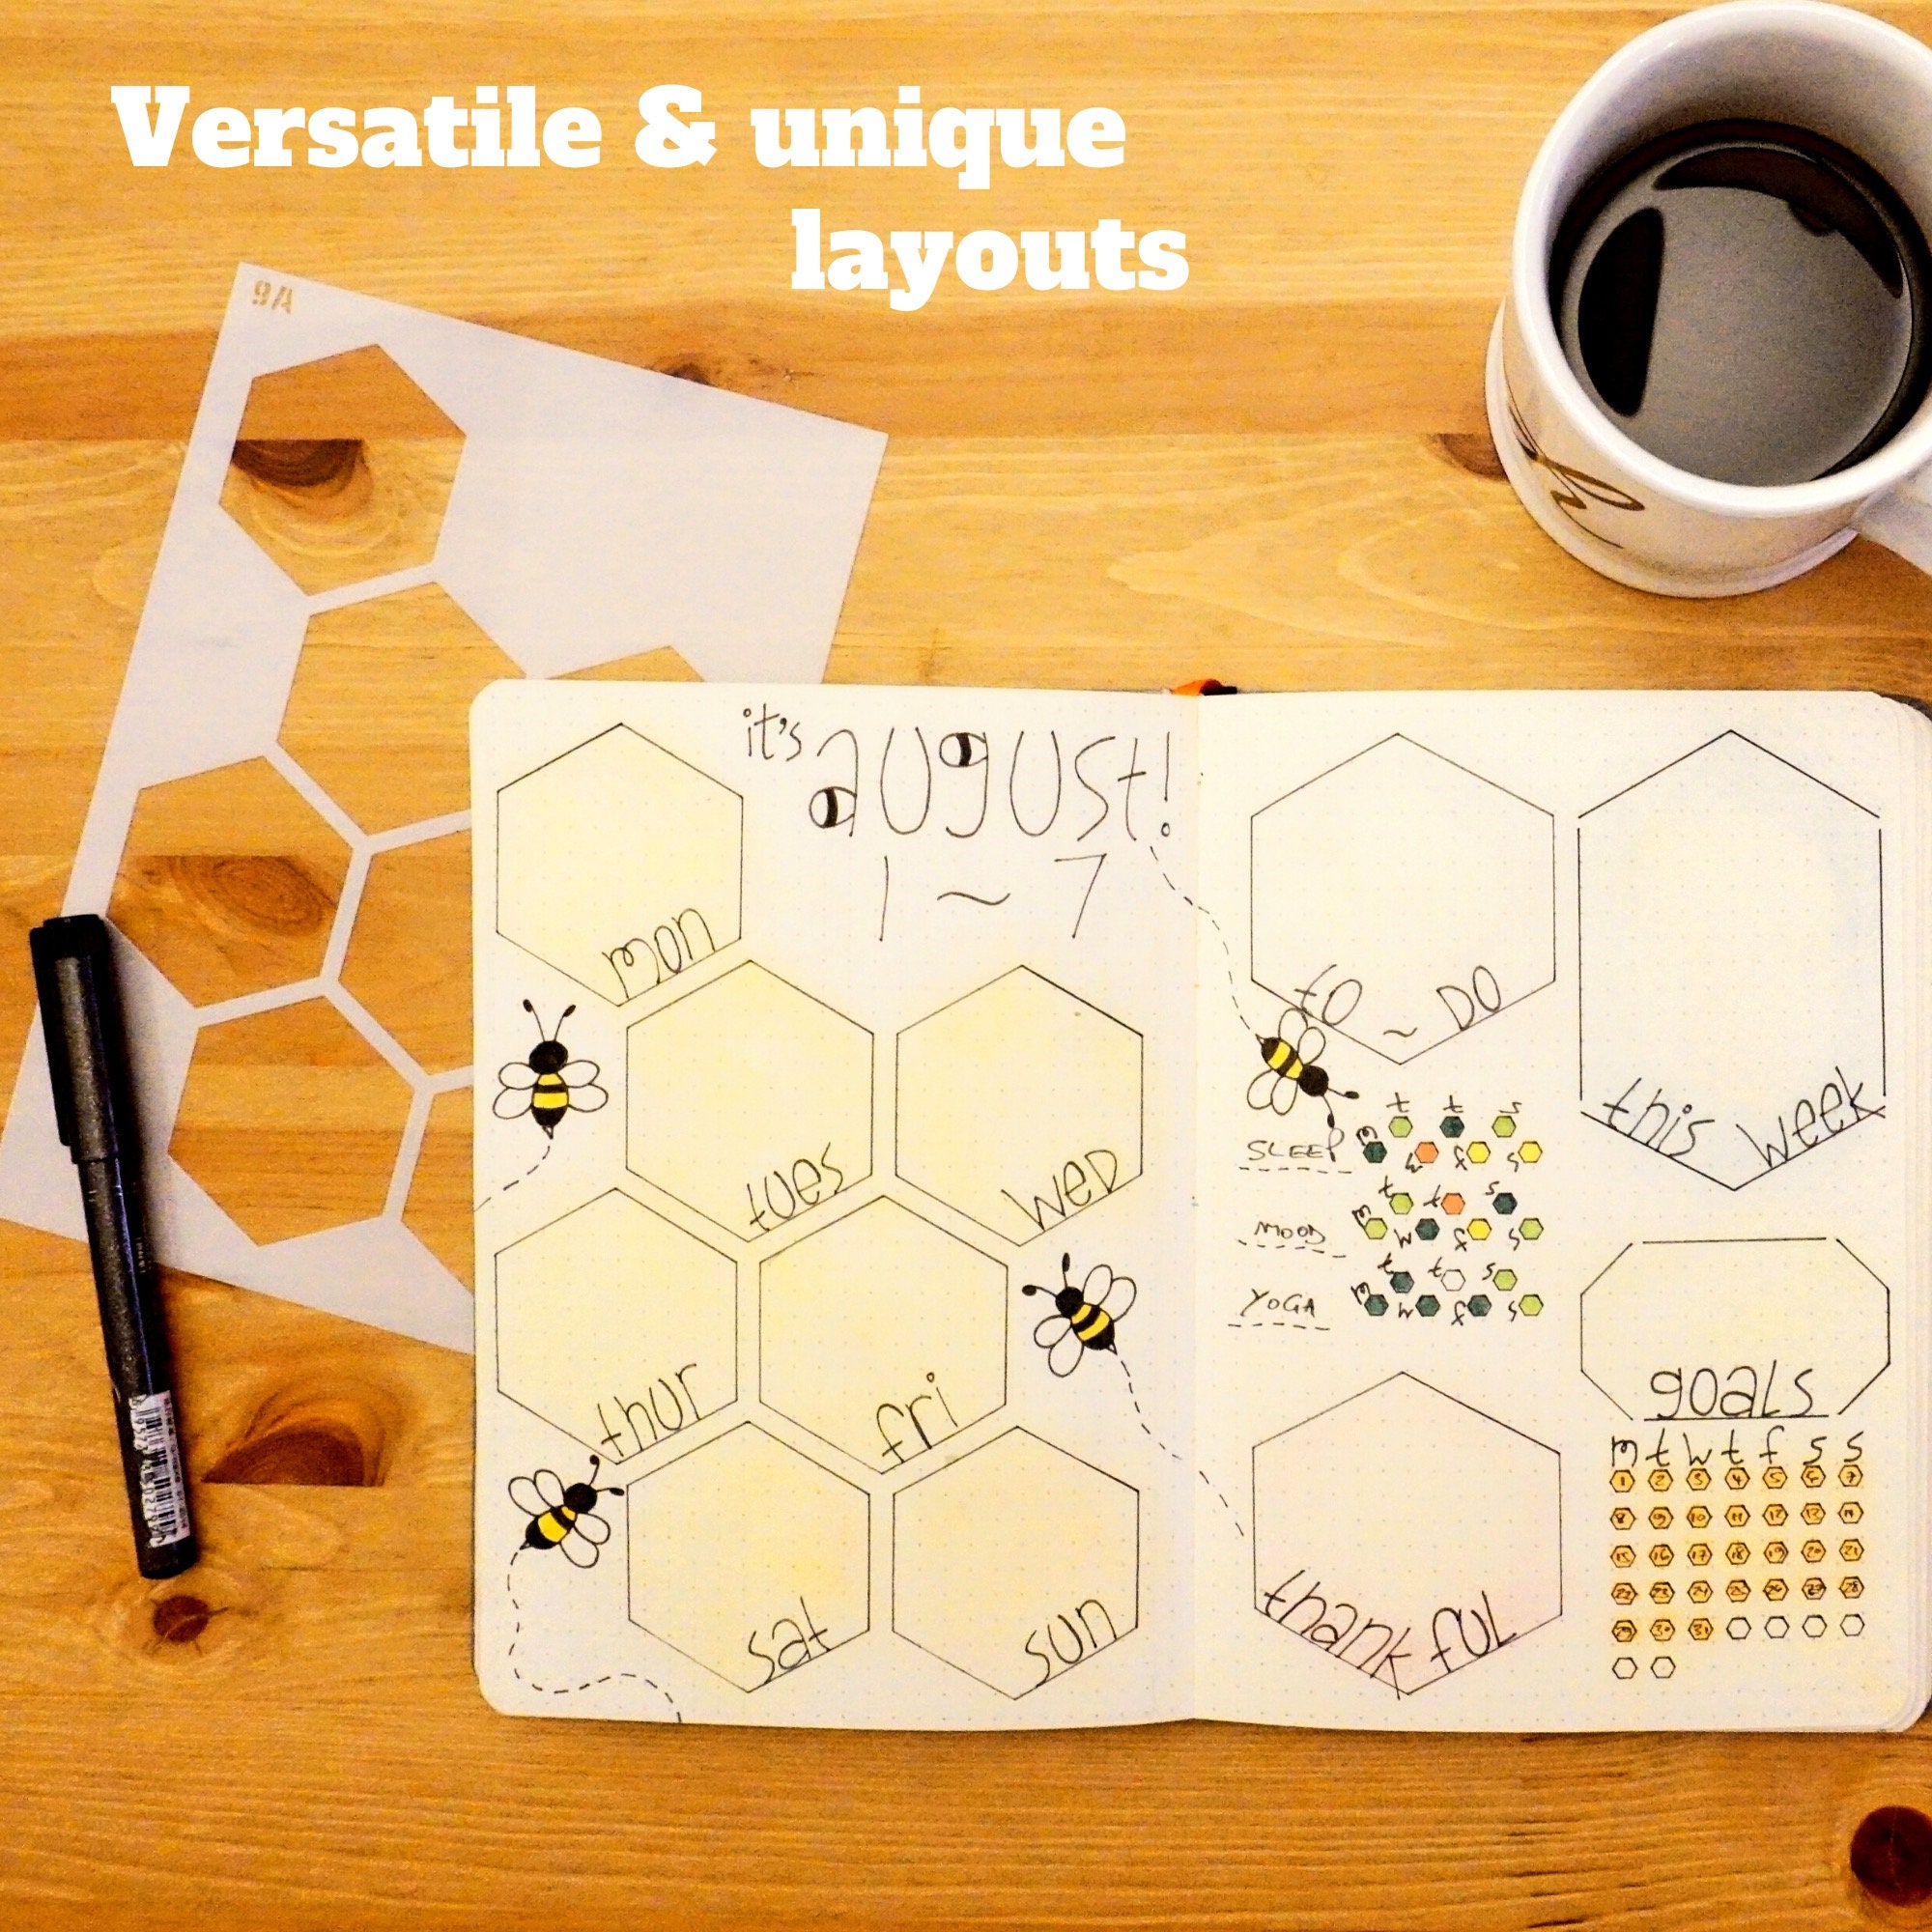 Speedy Spreads Journal Stencils (Weekly Layouts #3) - x6 Stencils for A5  Bullet Dot Grid Journal Notebook, Save Time on Full-Page Layouts, DIY  Planner